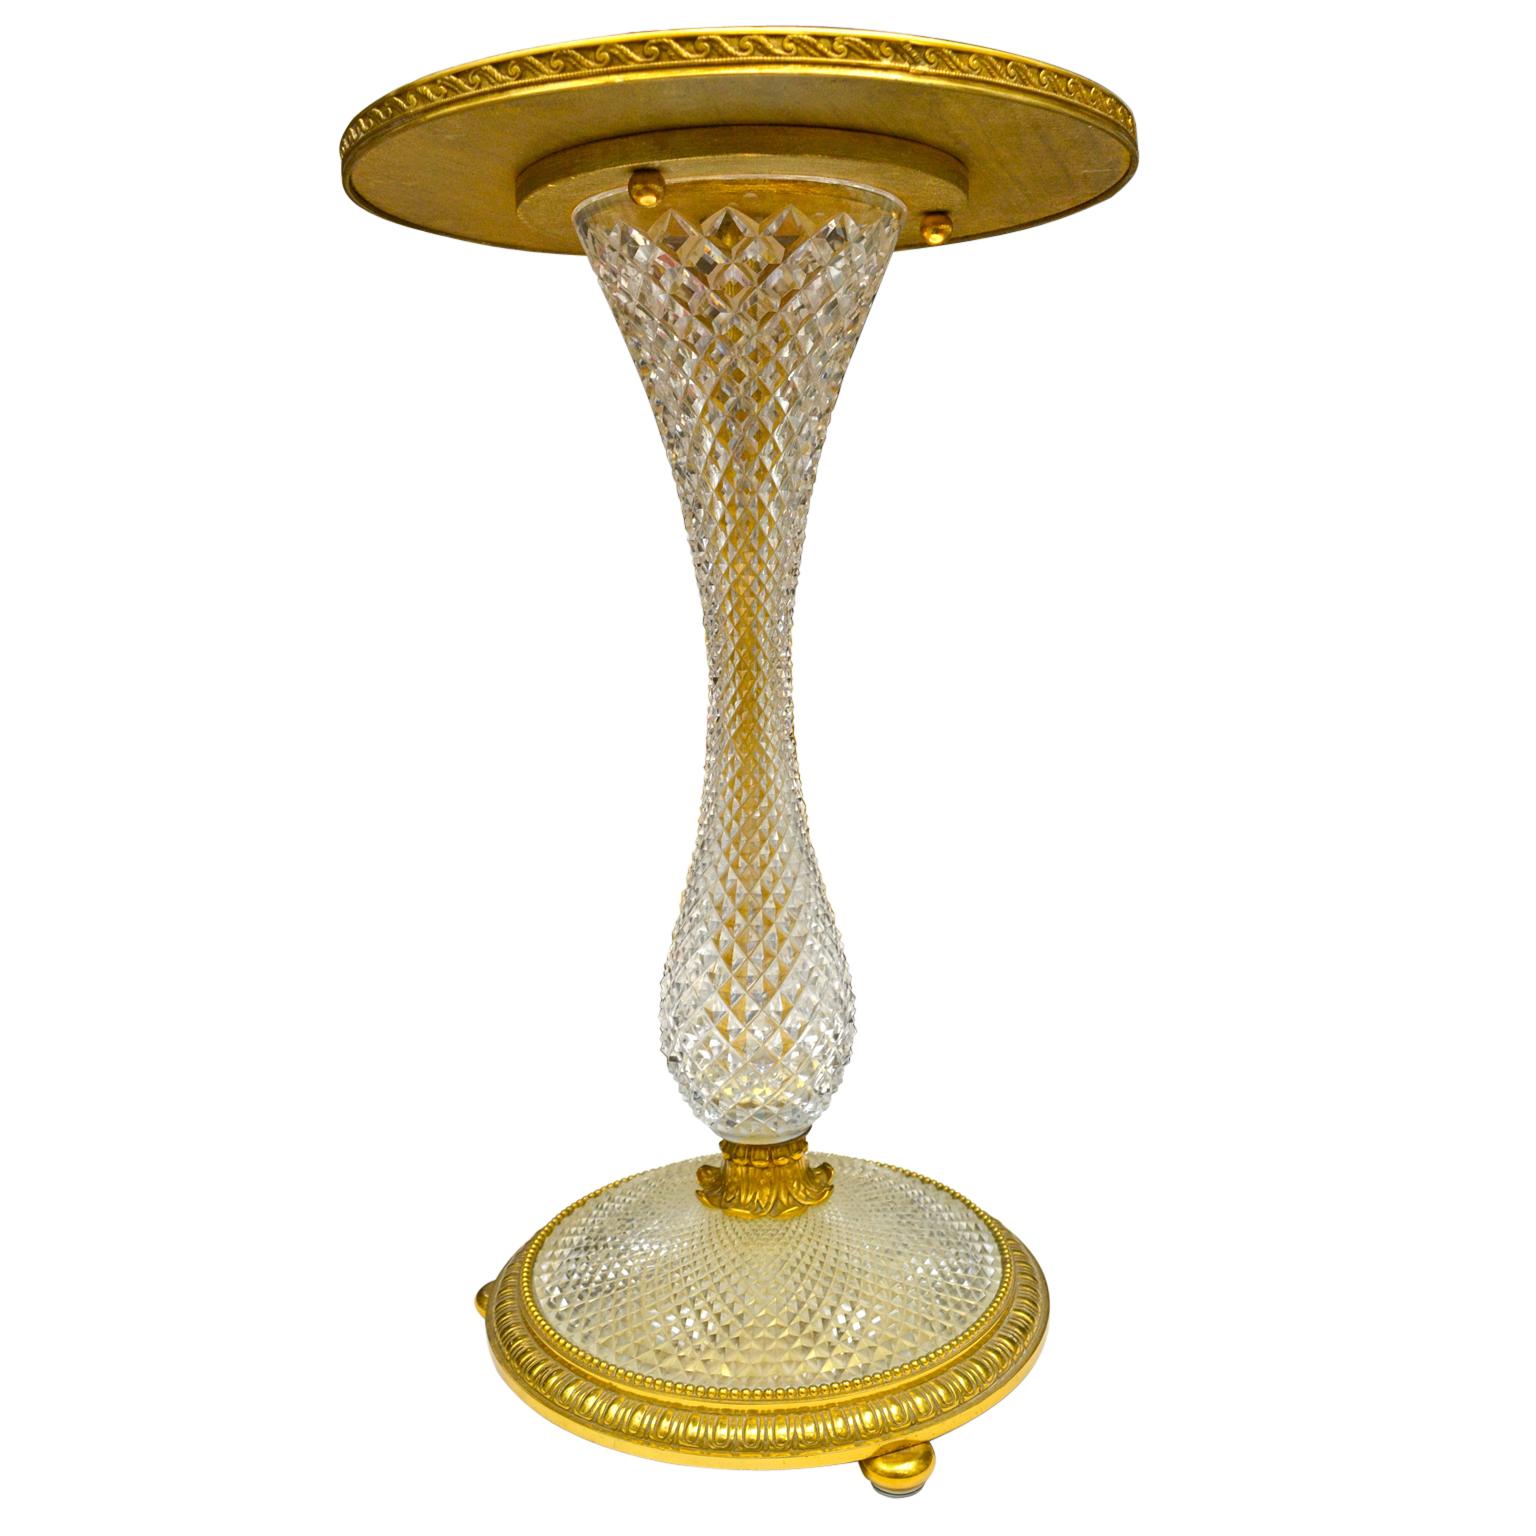 Neoclassical Revival Early 20 Century Cut Crystal and Gilt Bronze Lamp Table Attributed to Baccarat